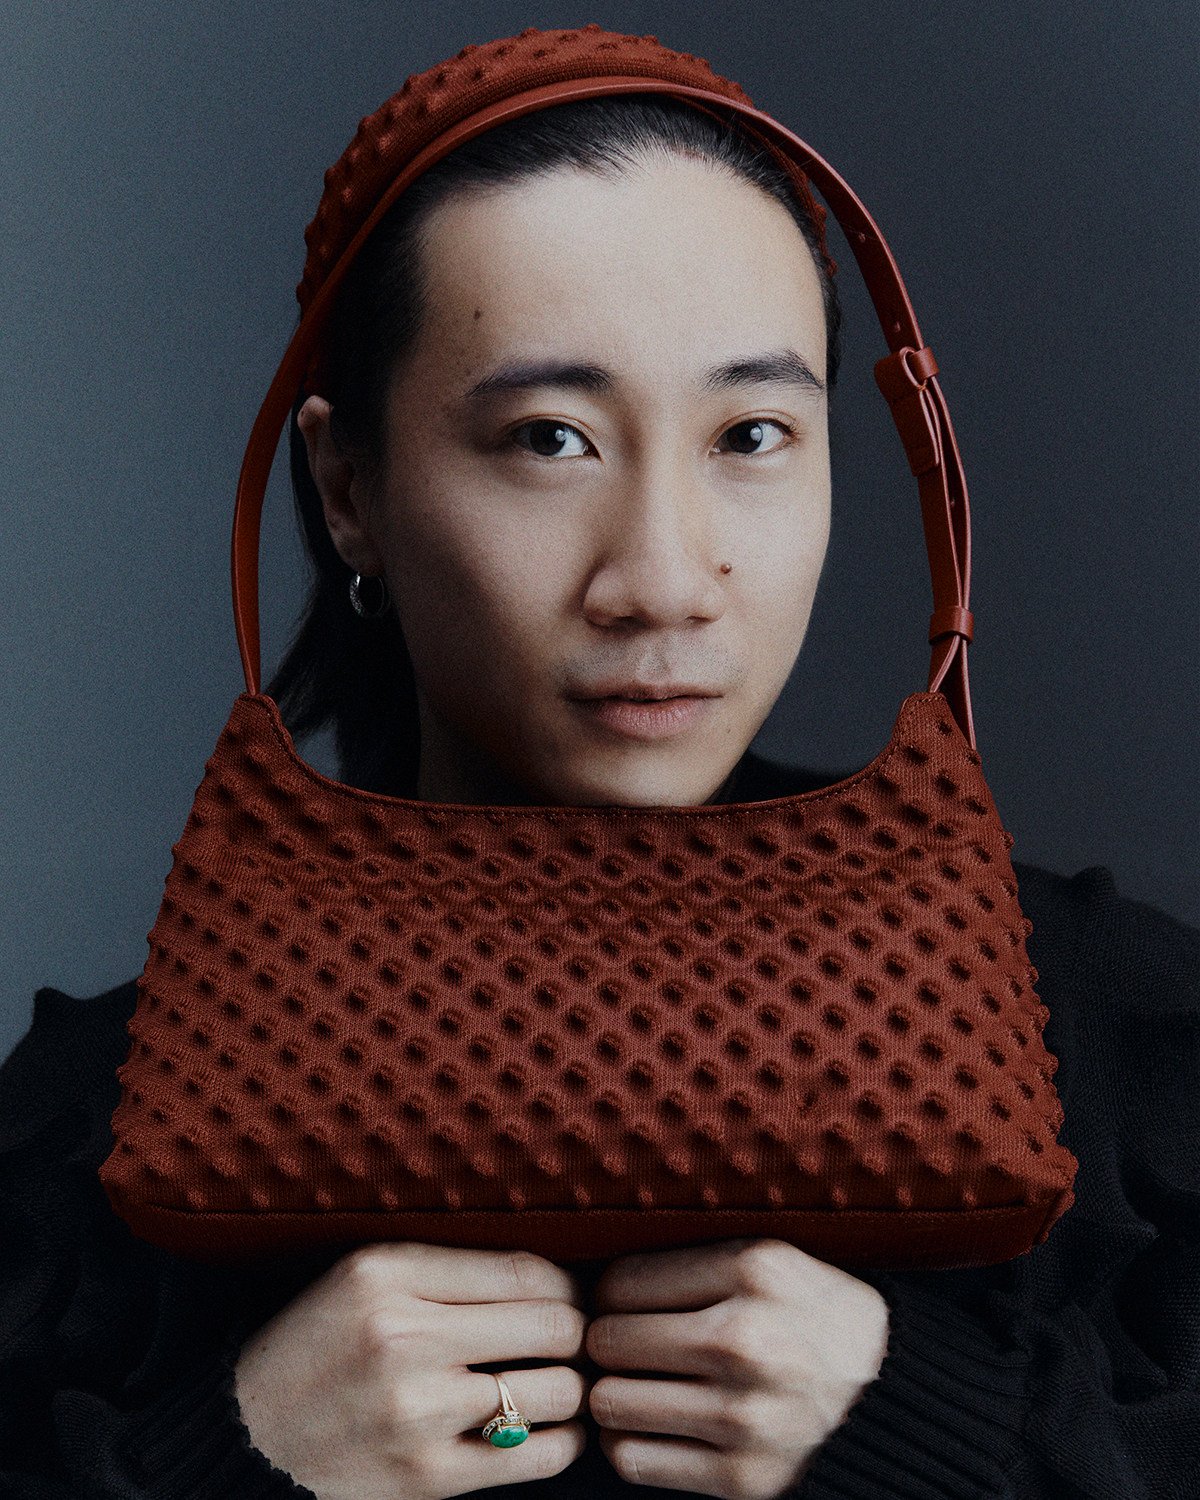 Having launched his eponymous knitwear label during the pandemic, Chet Lo’s durian-inspired tie-up with Charles & Keith marks the designer’s first foray into accessories. Photos: Handout